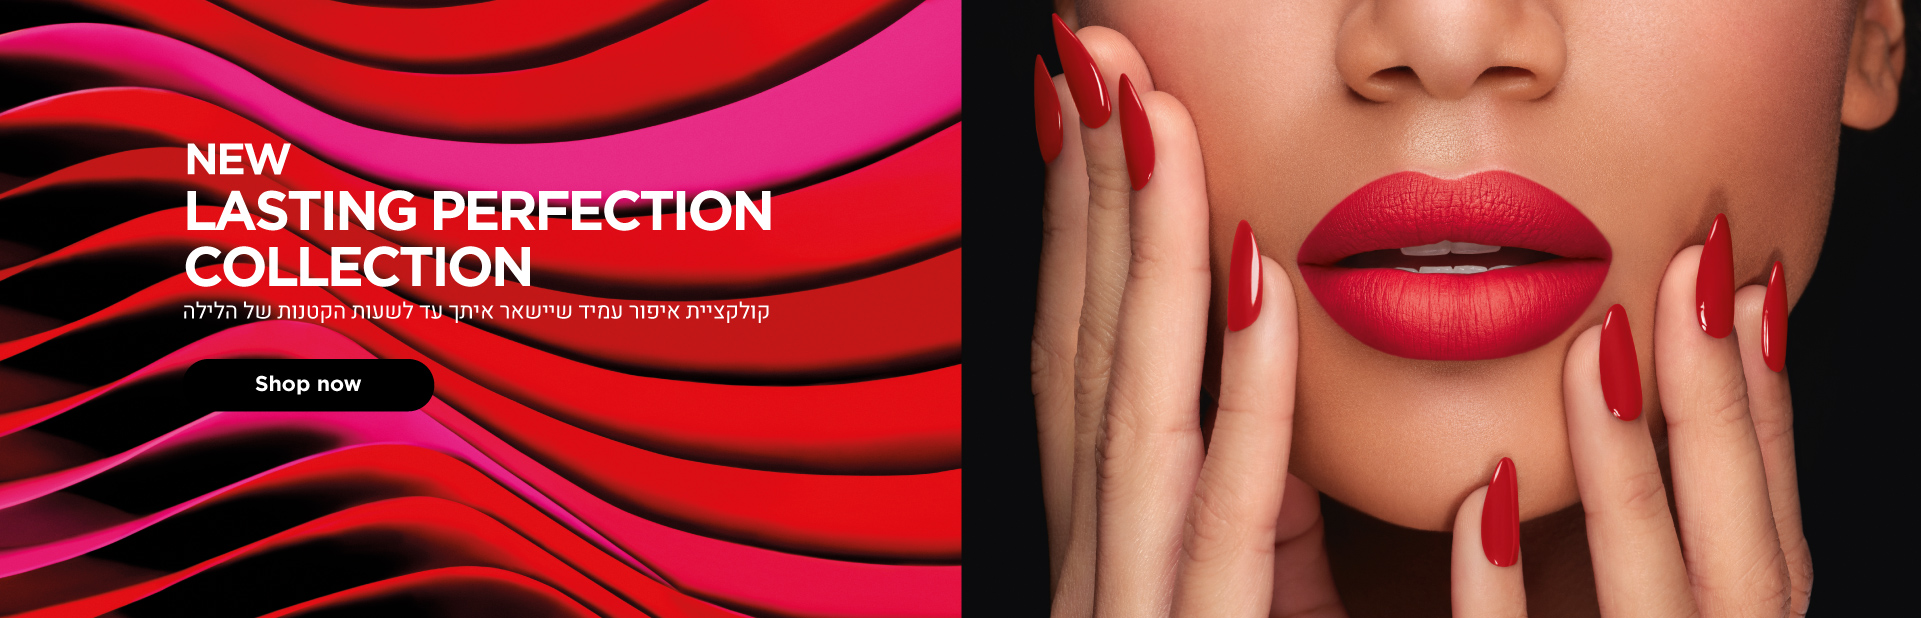 new lasting perfection collection